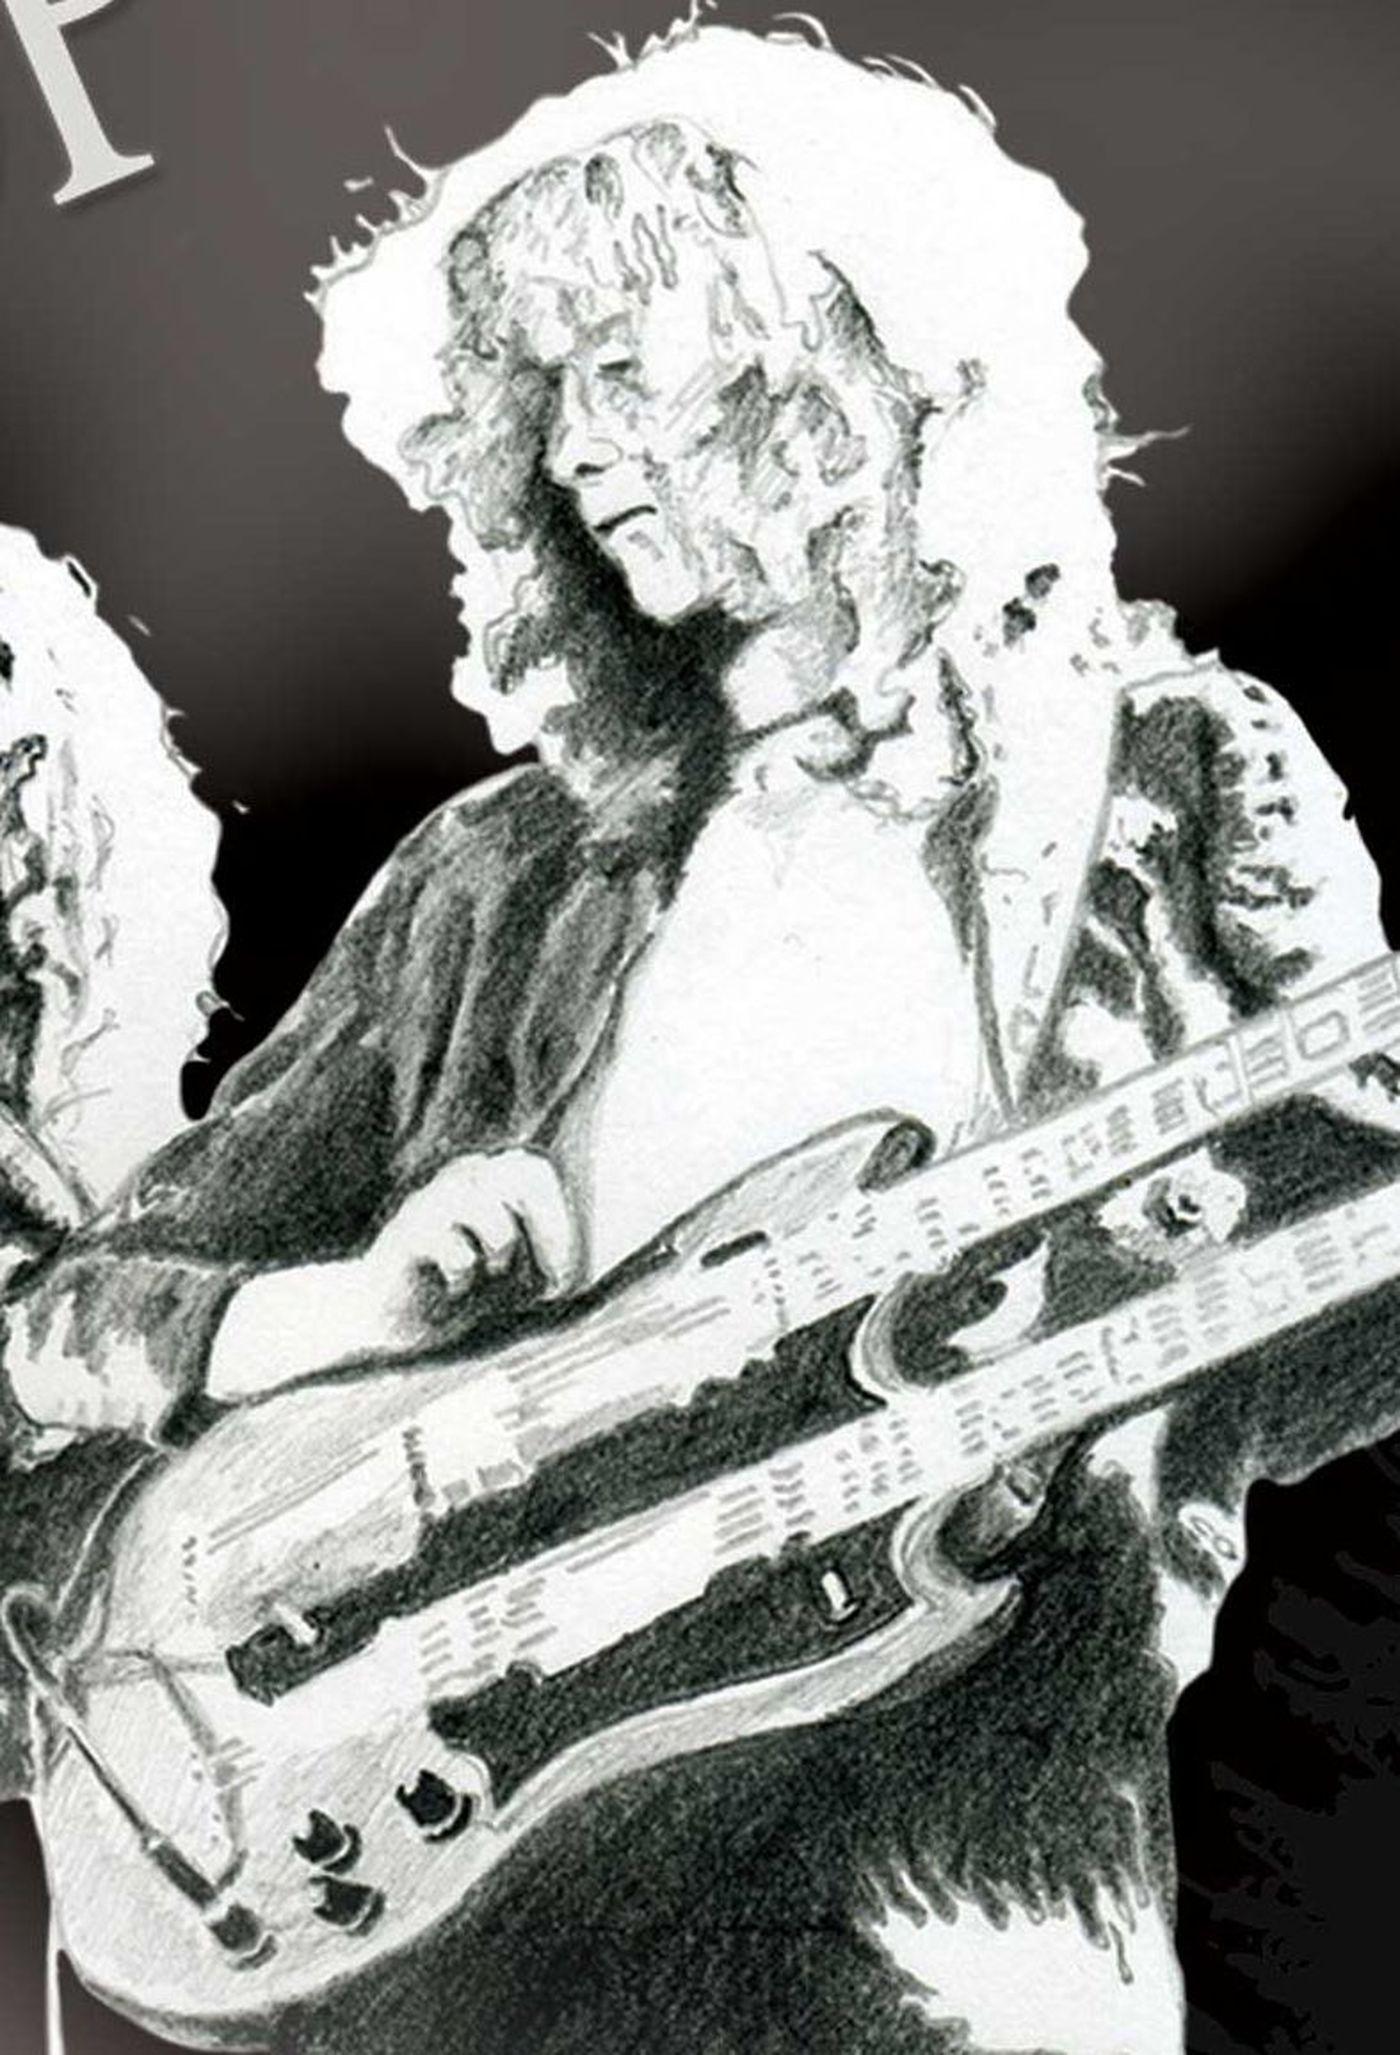 Electric Legends 4: A Tribute To Led Zeppelin & Jimmy Page's Greatest Riffs